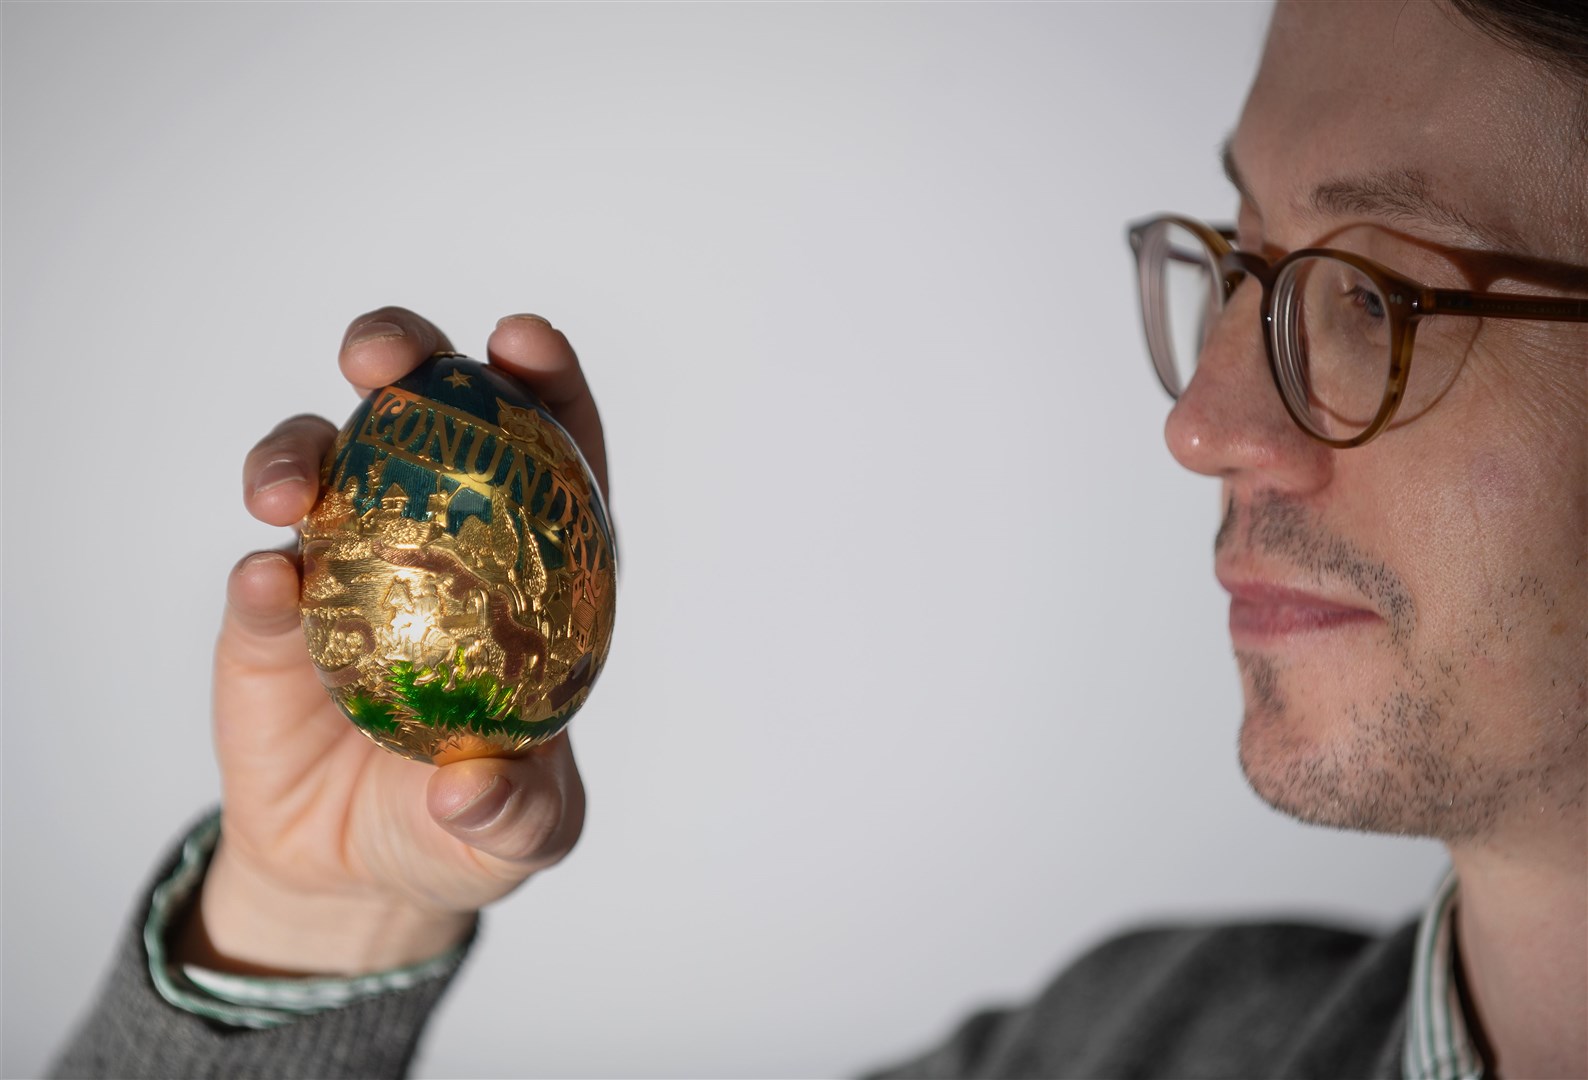 The rare 22-carat gold Cadbury’s Conundrum egg exceeded estimates to sell at auction for £37,200 (Joe Giddens/PA)